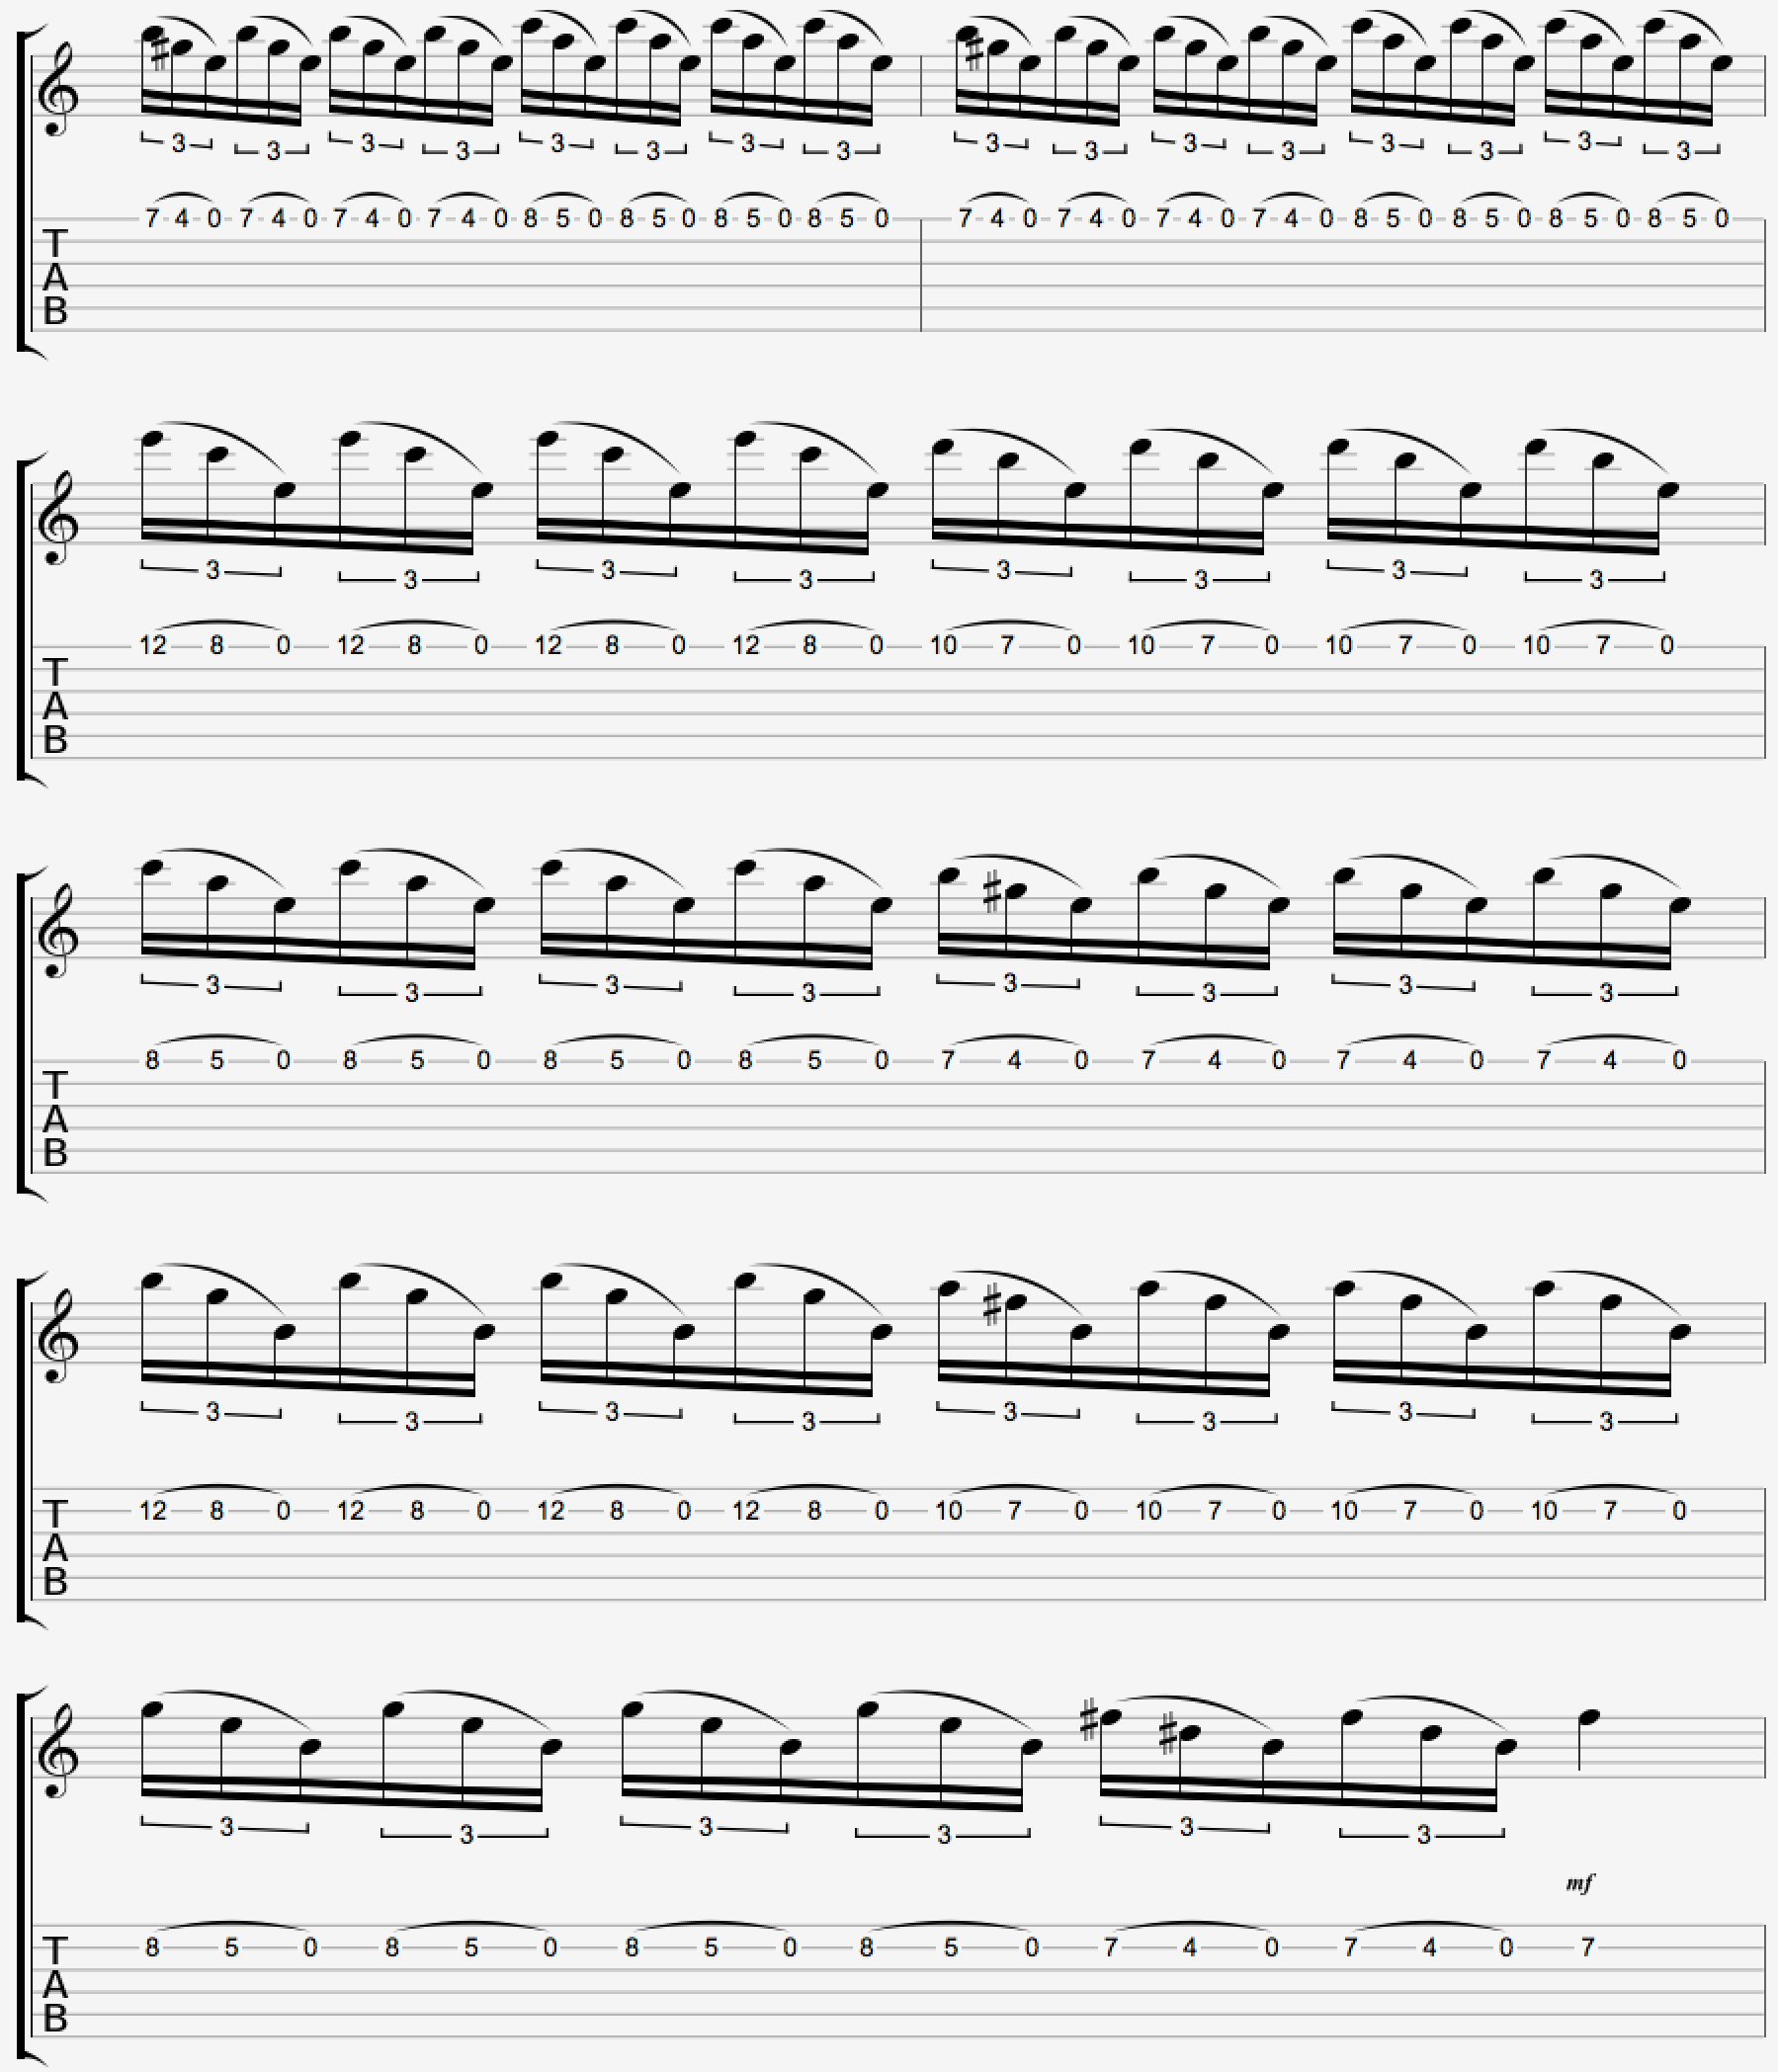 Transcription of Randy Rhoads' tapping solo in Suicide Solution 